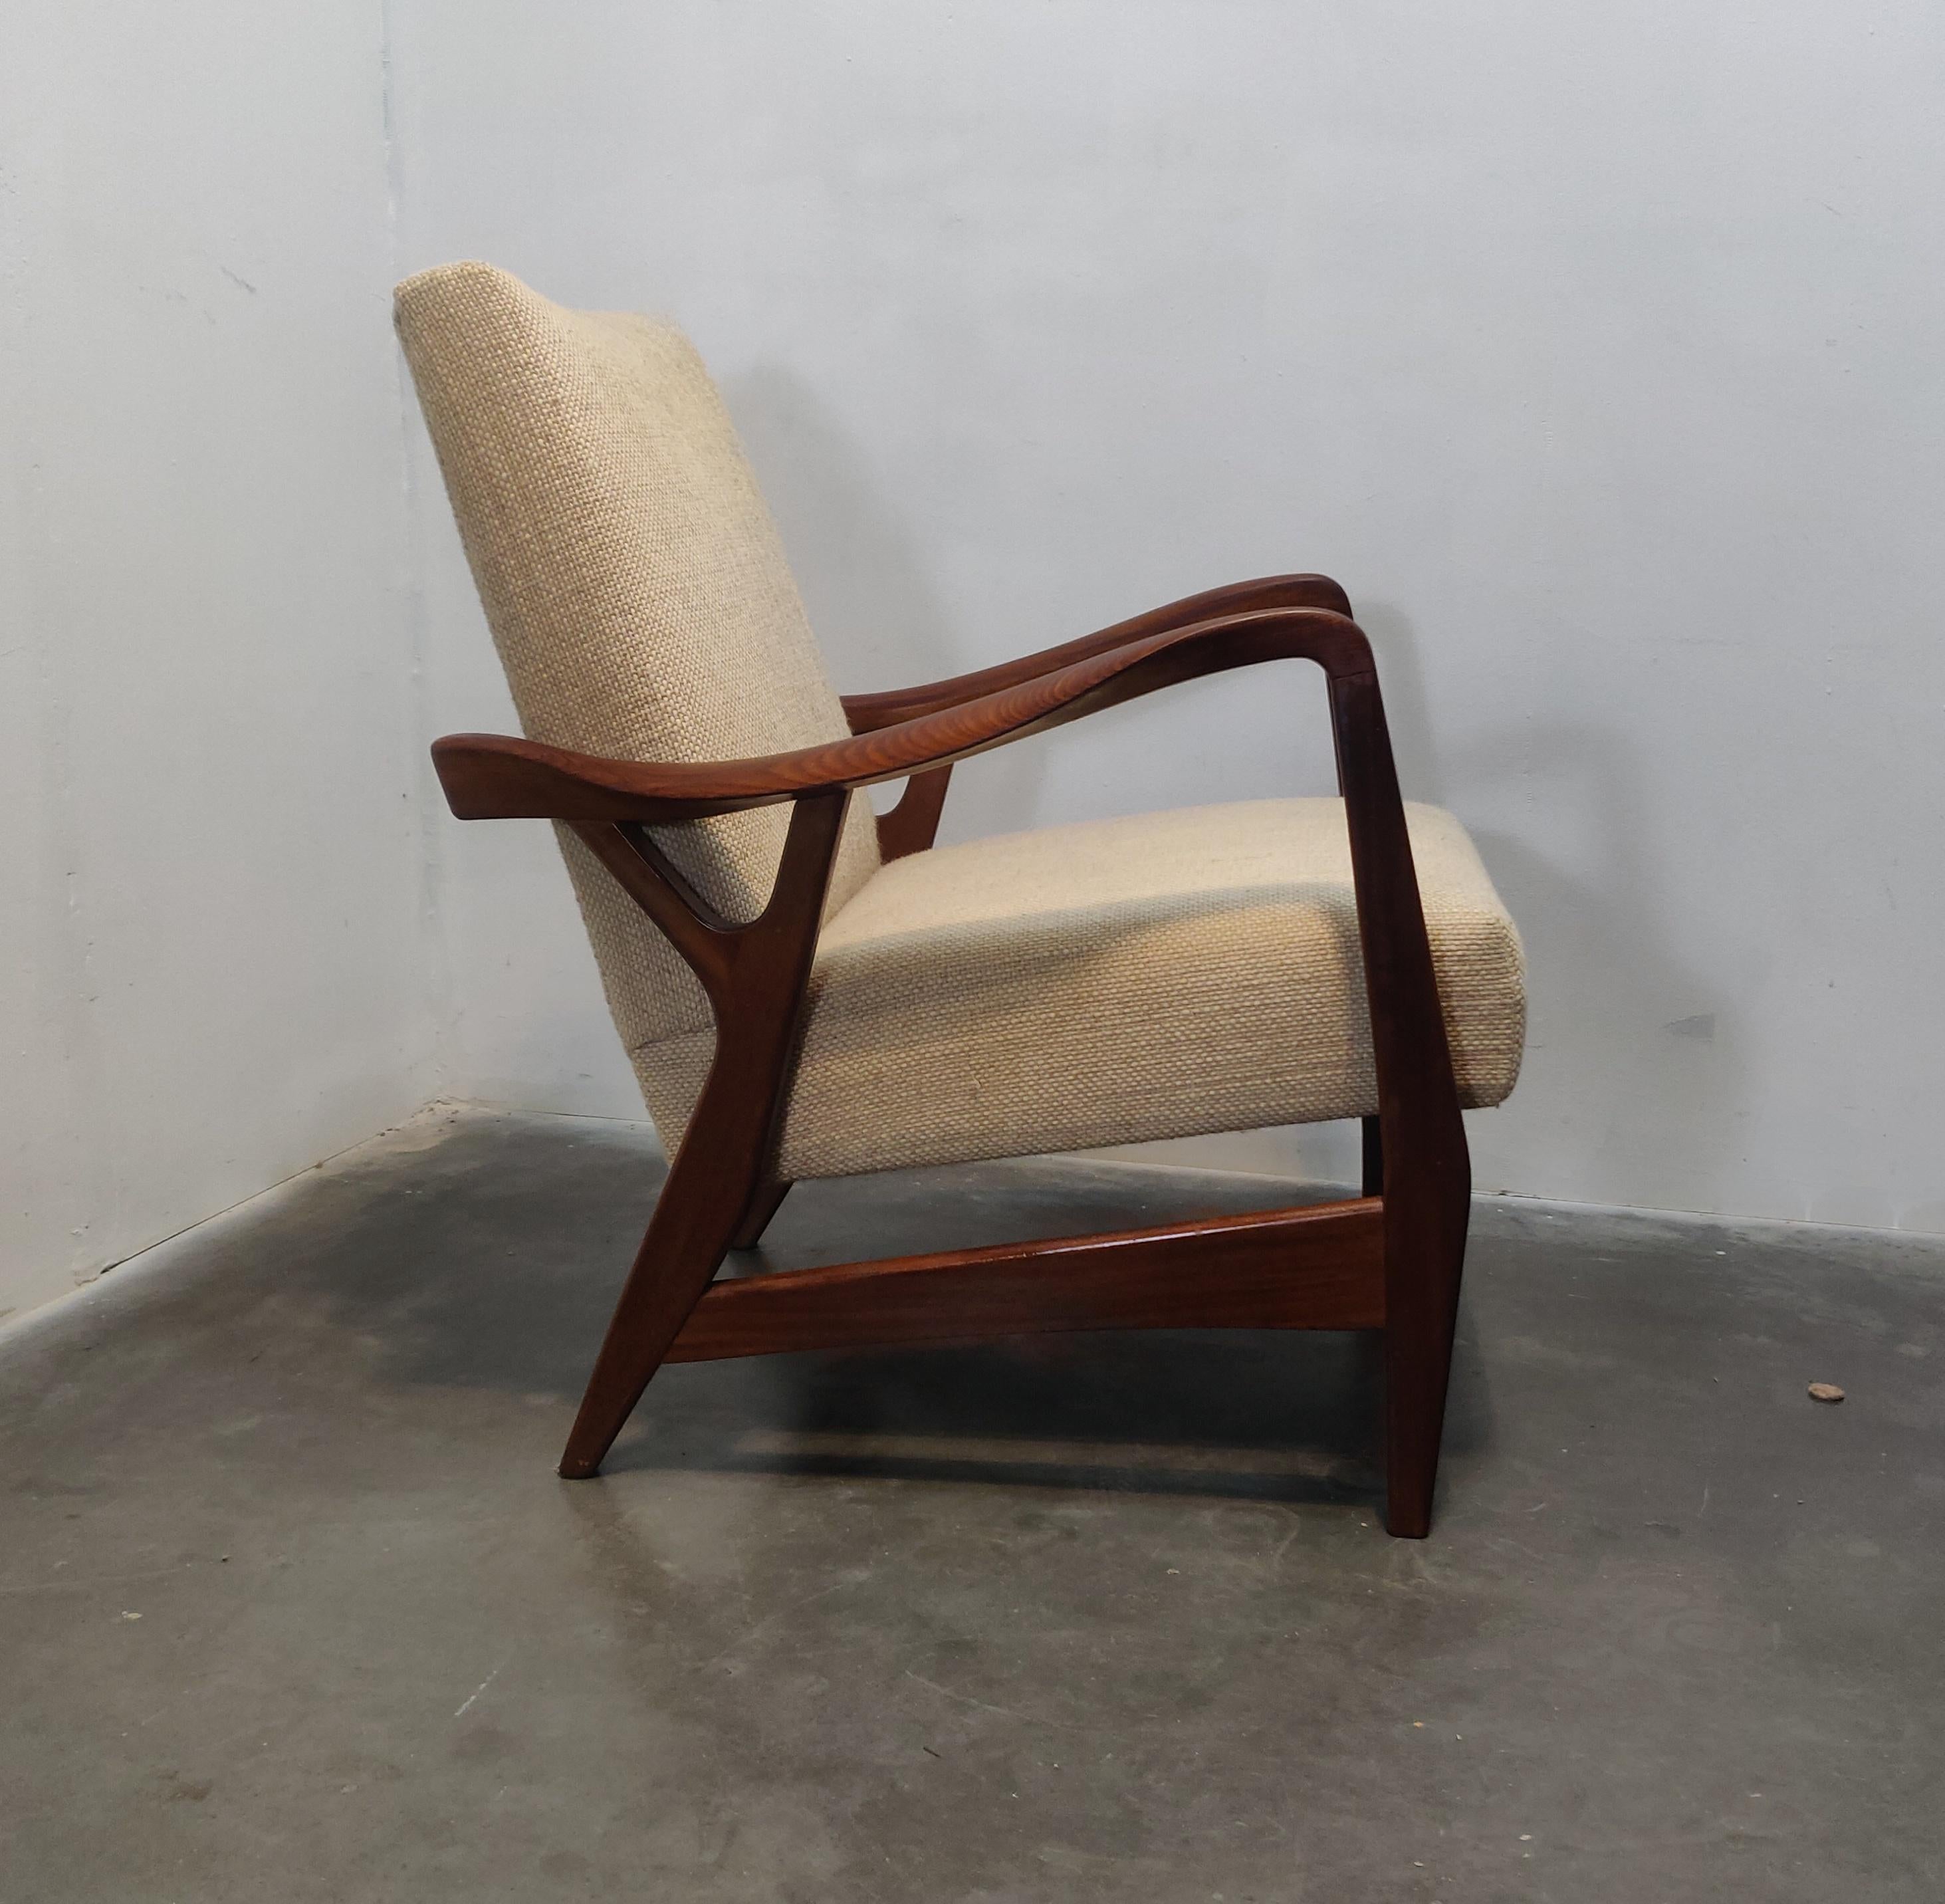 Organic Shaped Massive Teak Lounge Chair by Topform, 1950s In Good Condition For Sale In MIJDRECHT, NL